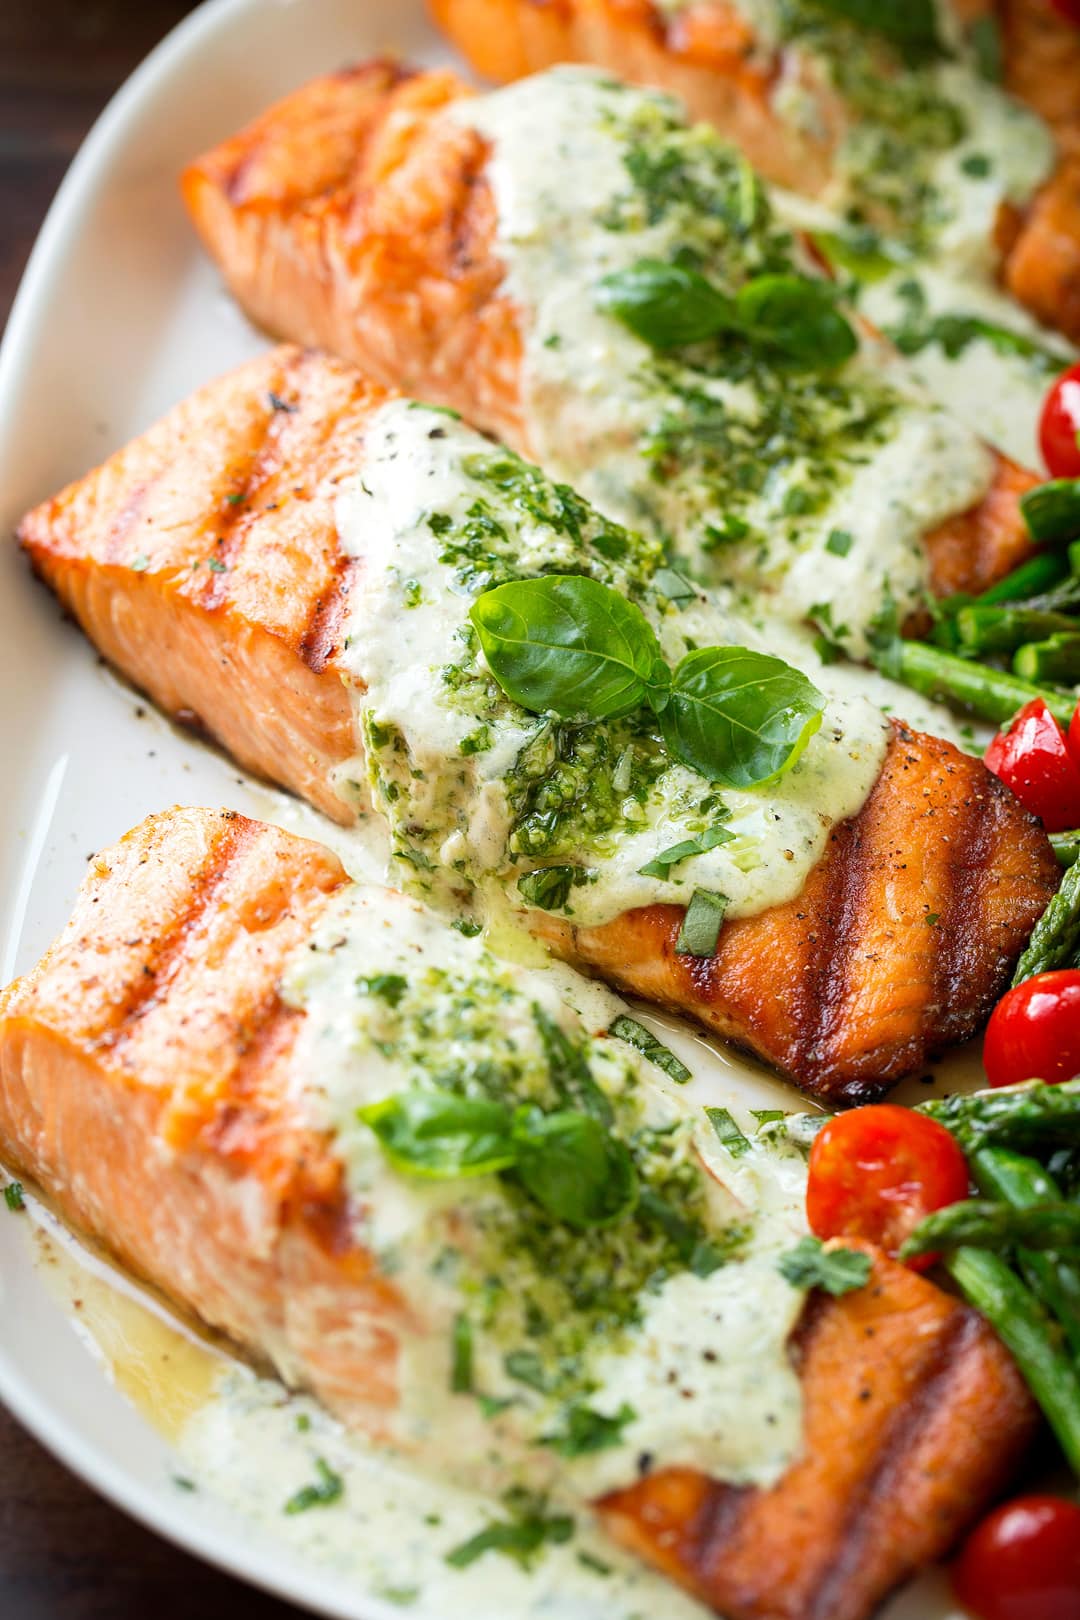 Grilled Salmon fillets with Pesto sauce on serving plate with veggies